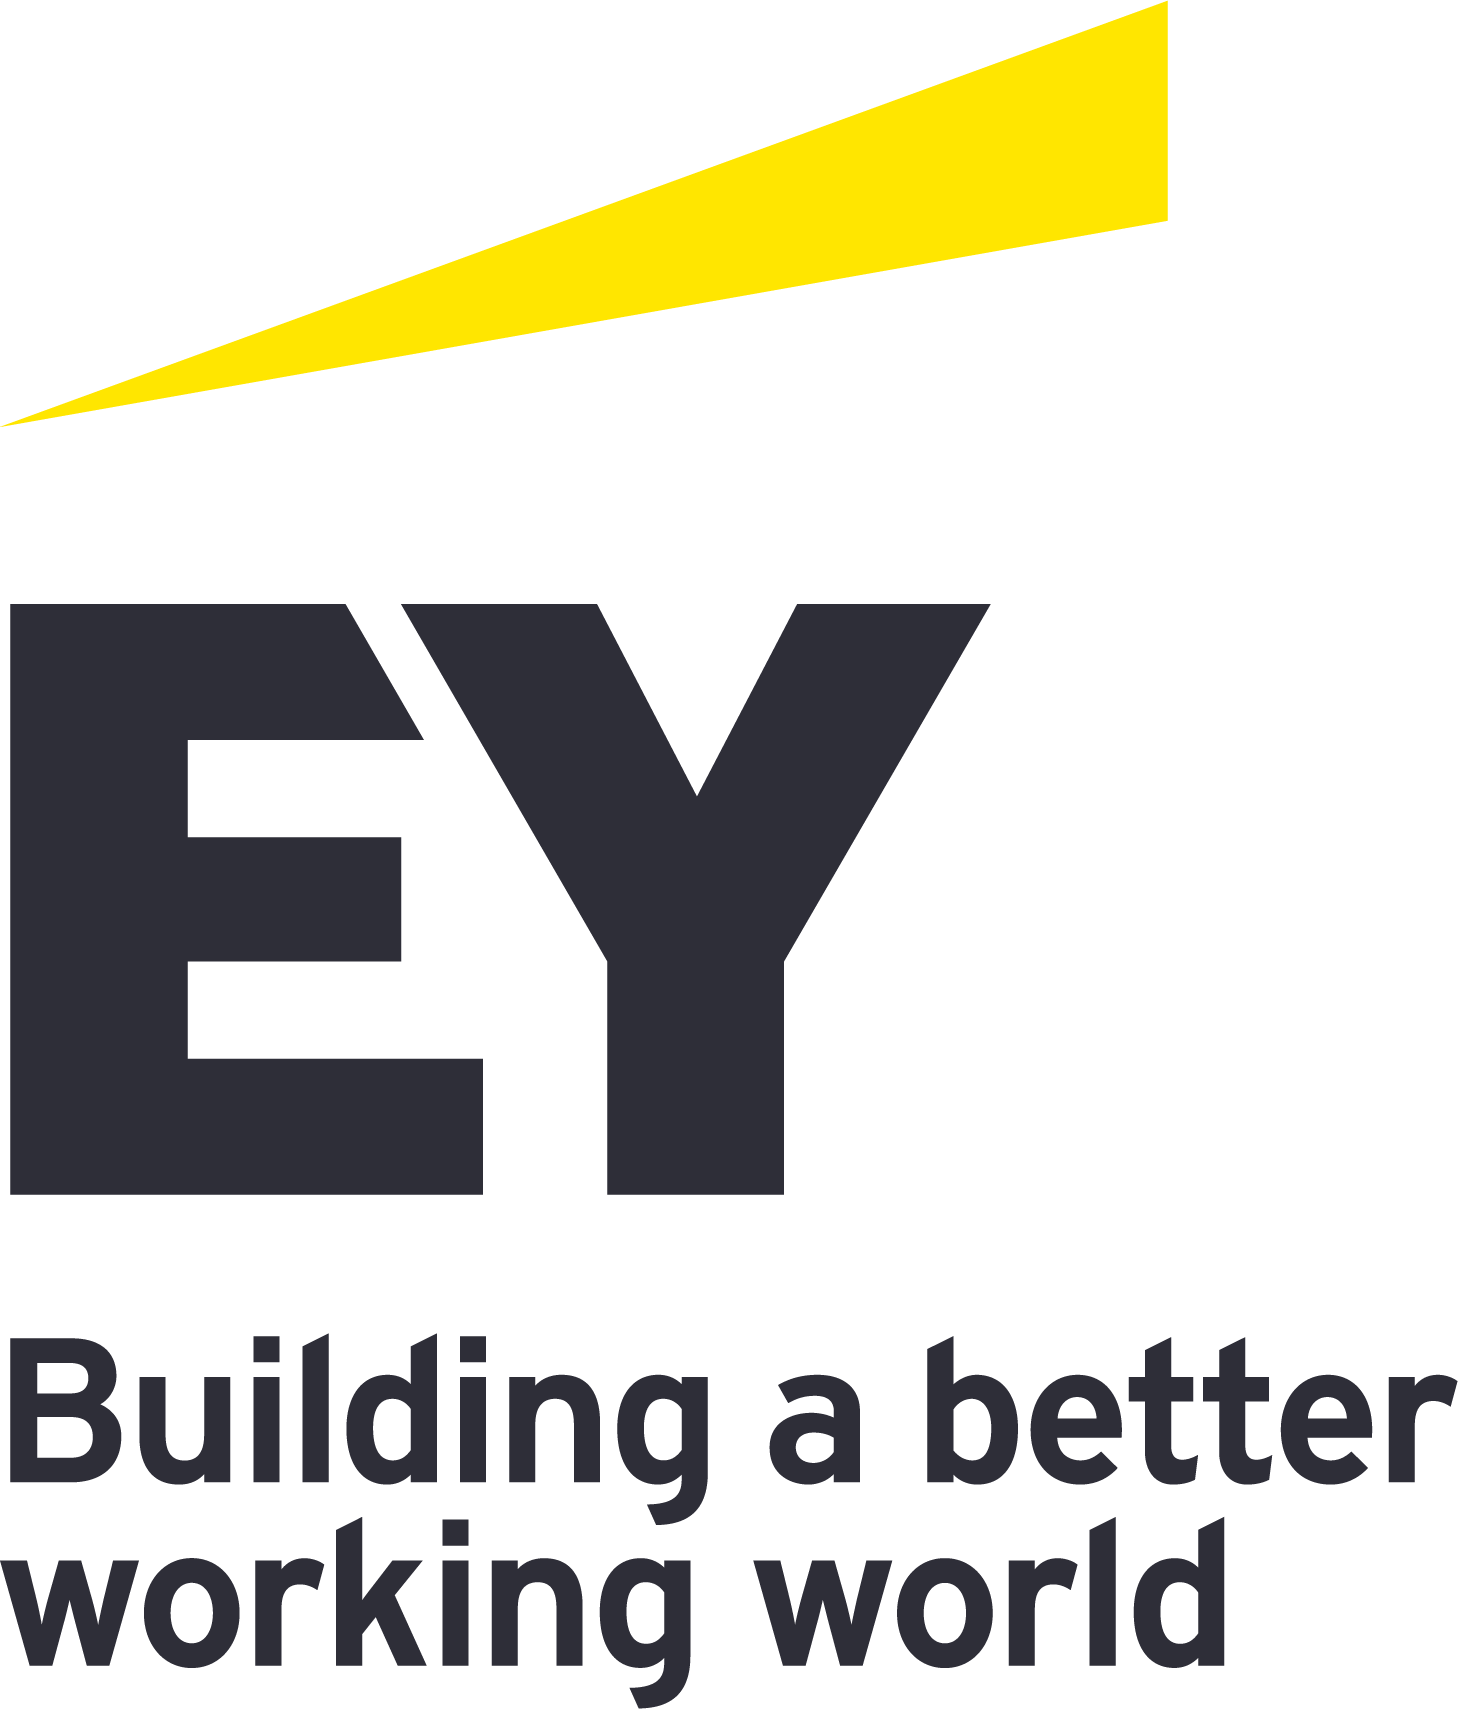 5 ernst and young